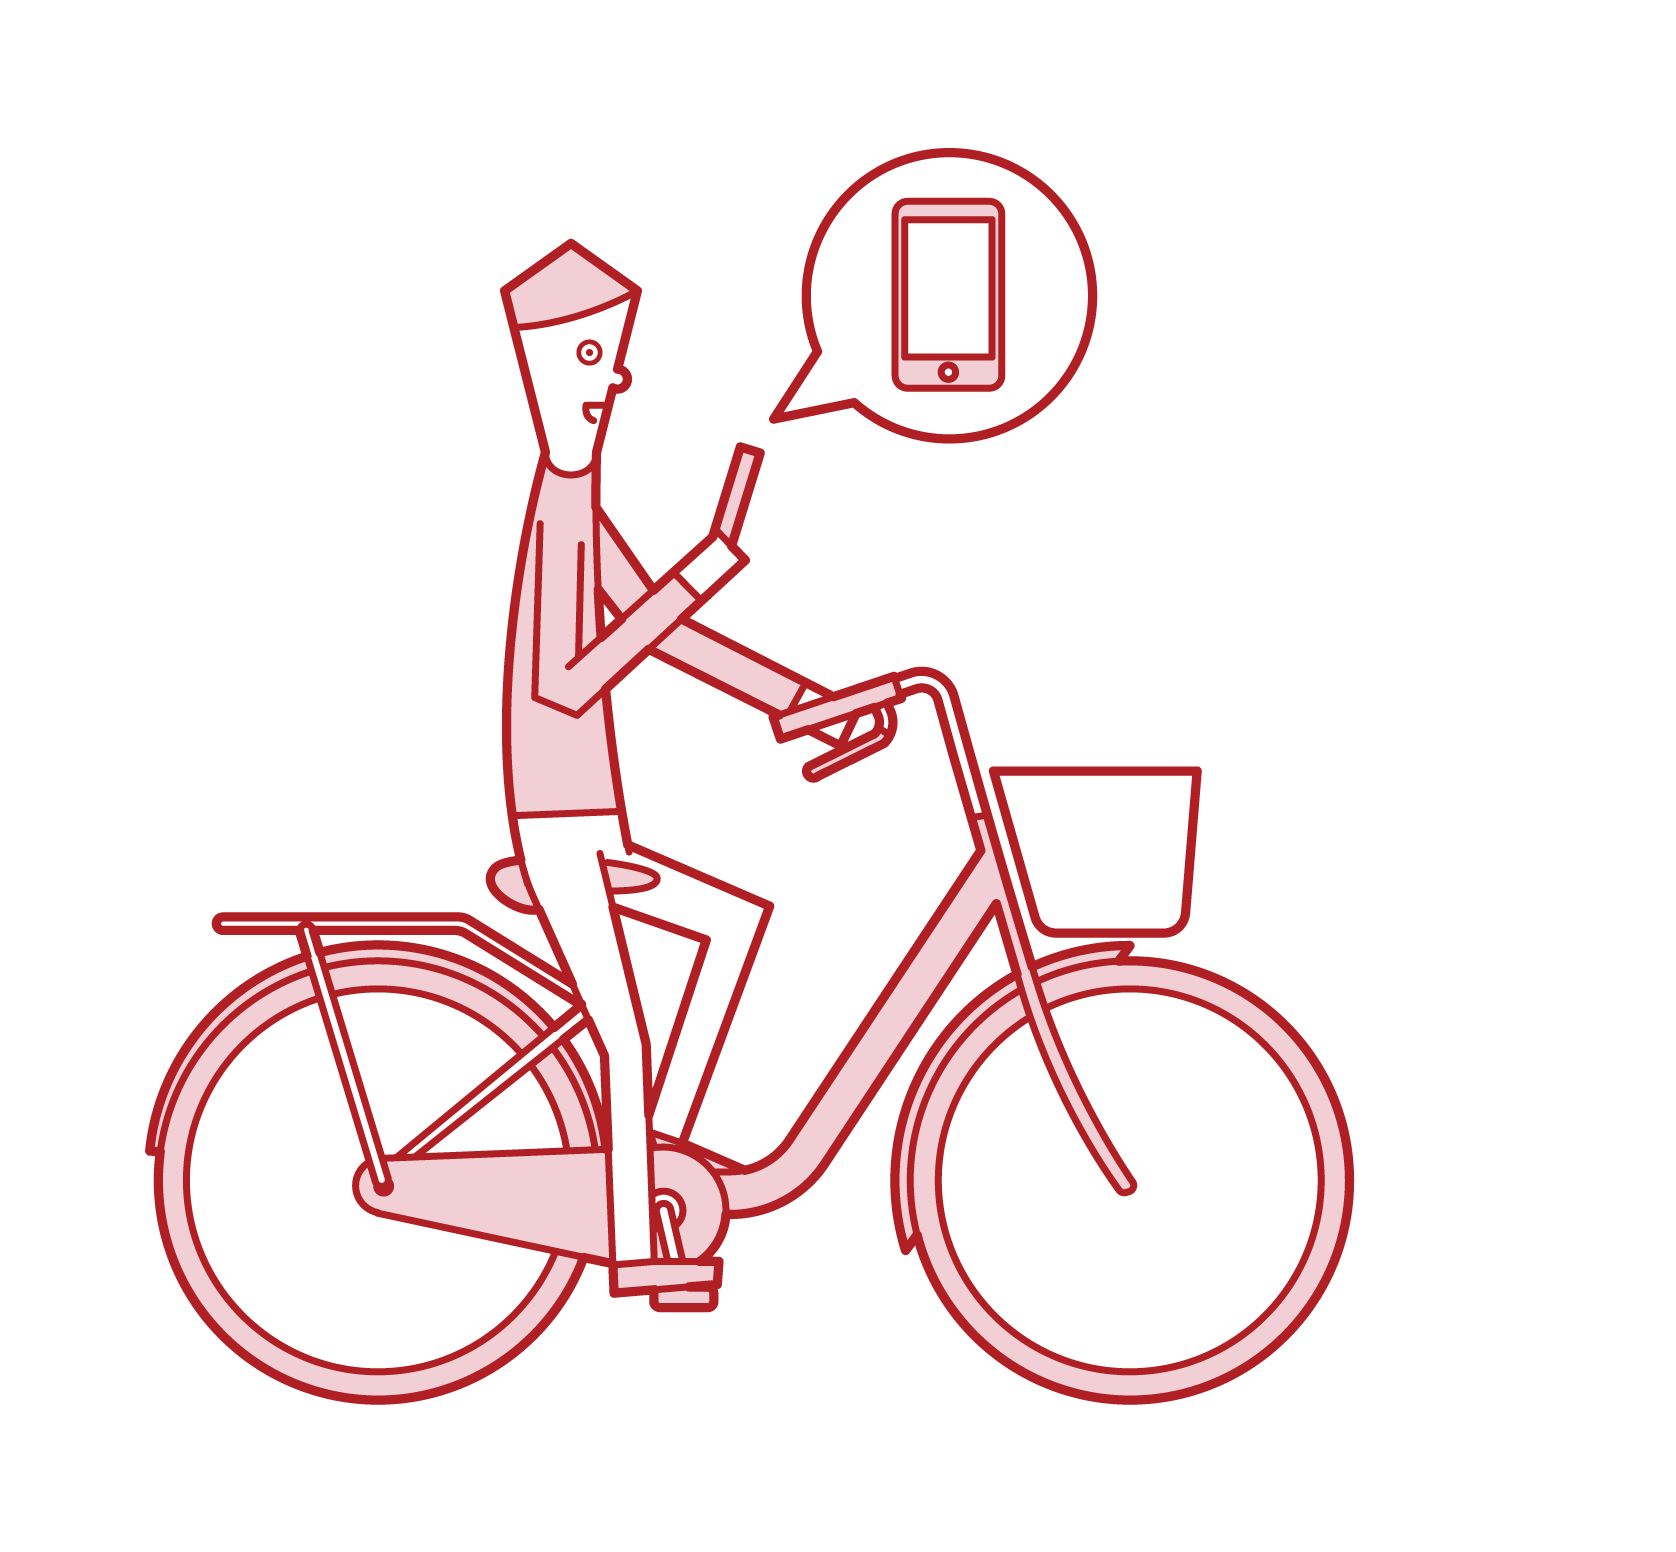 Illustration of a man riding a bicycle while operating a smartphone